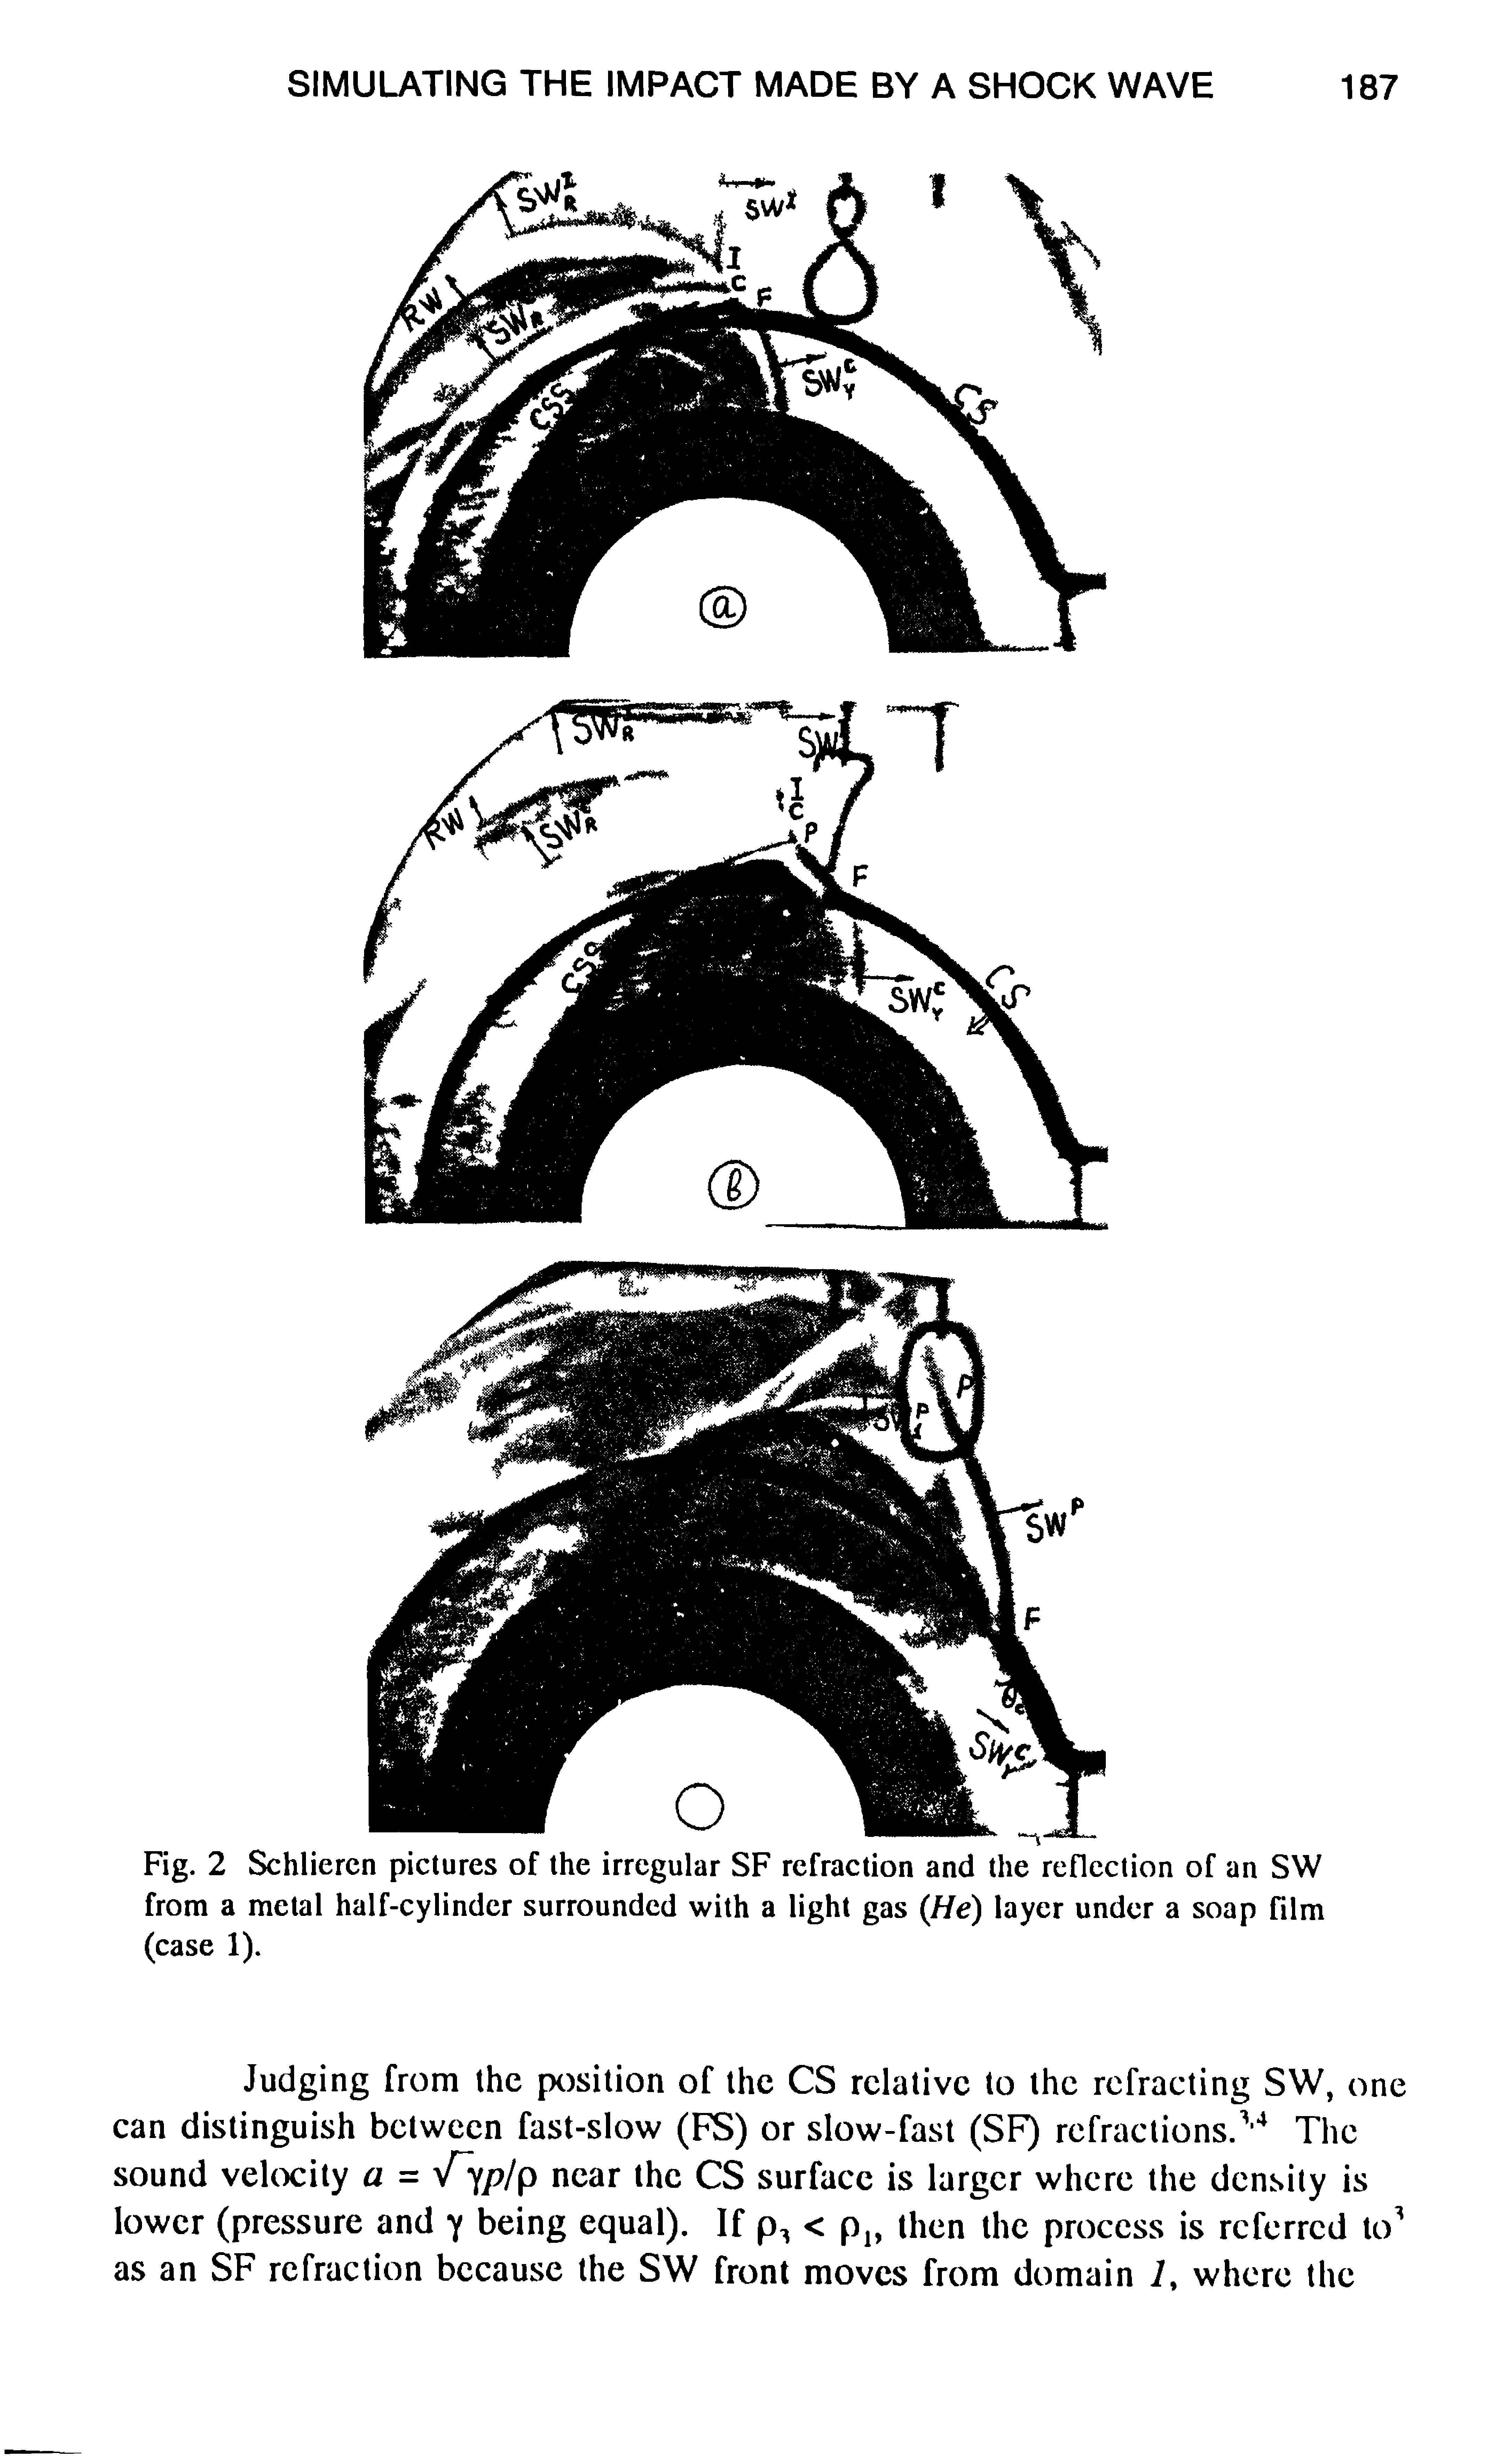 Fig. 2 Schlieren pictures of the irregular SF refraction and the reflection of an SW from a metal half-cylinder surrounded with a light gas (He) layer under a soap film (case 1).